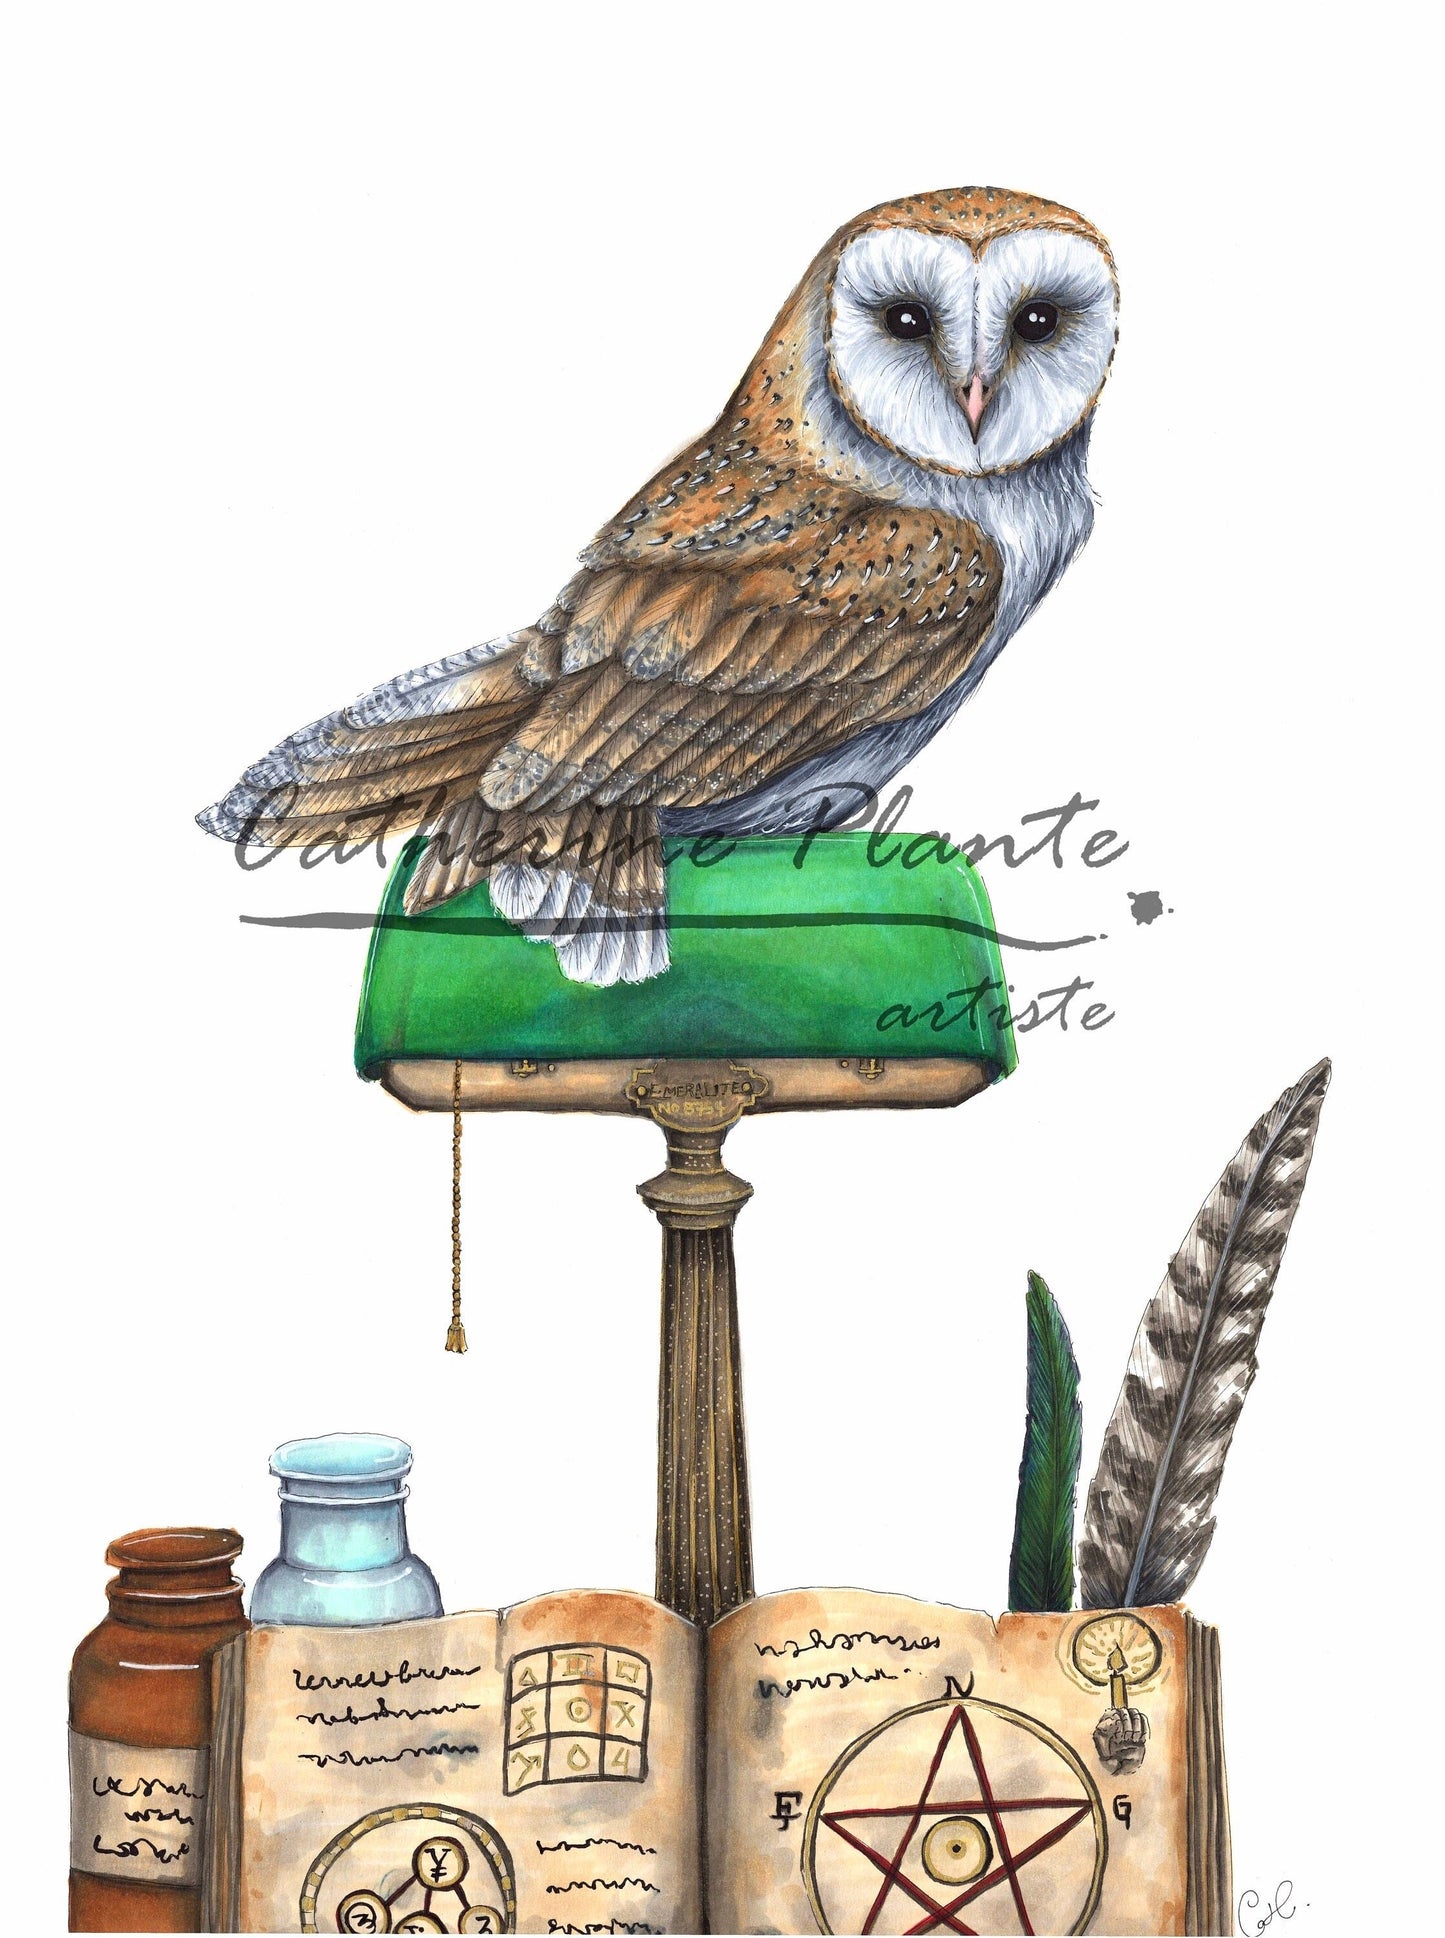 Grande illustration originale - Bewitched by the Owl